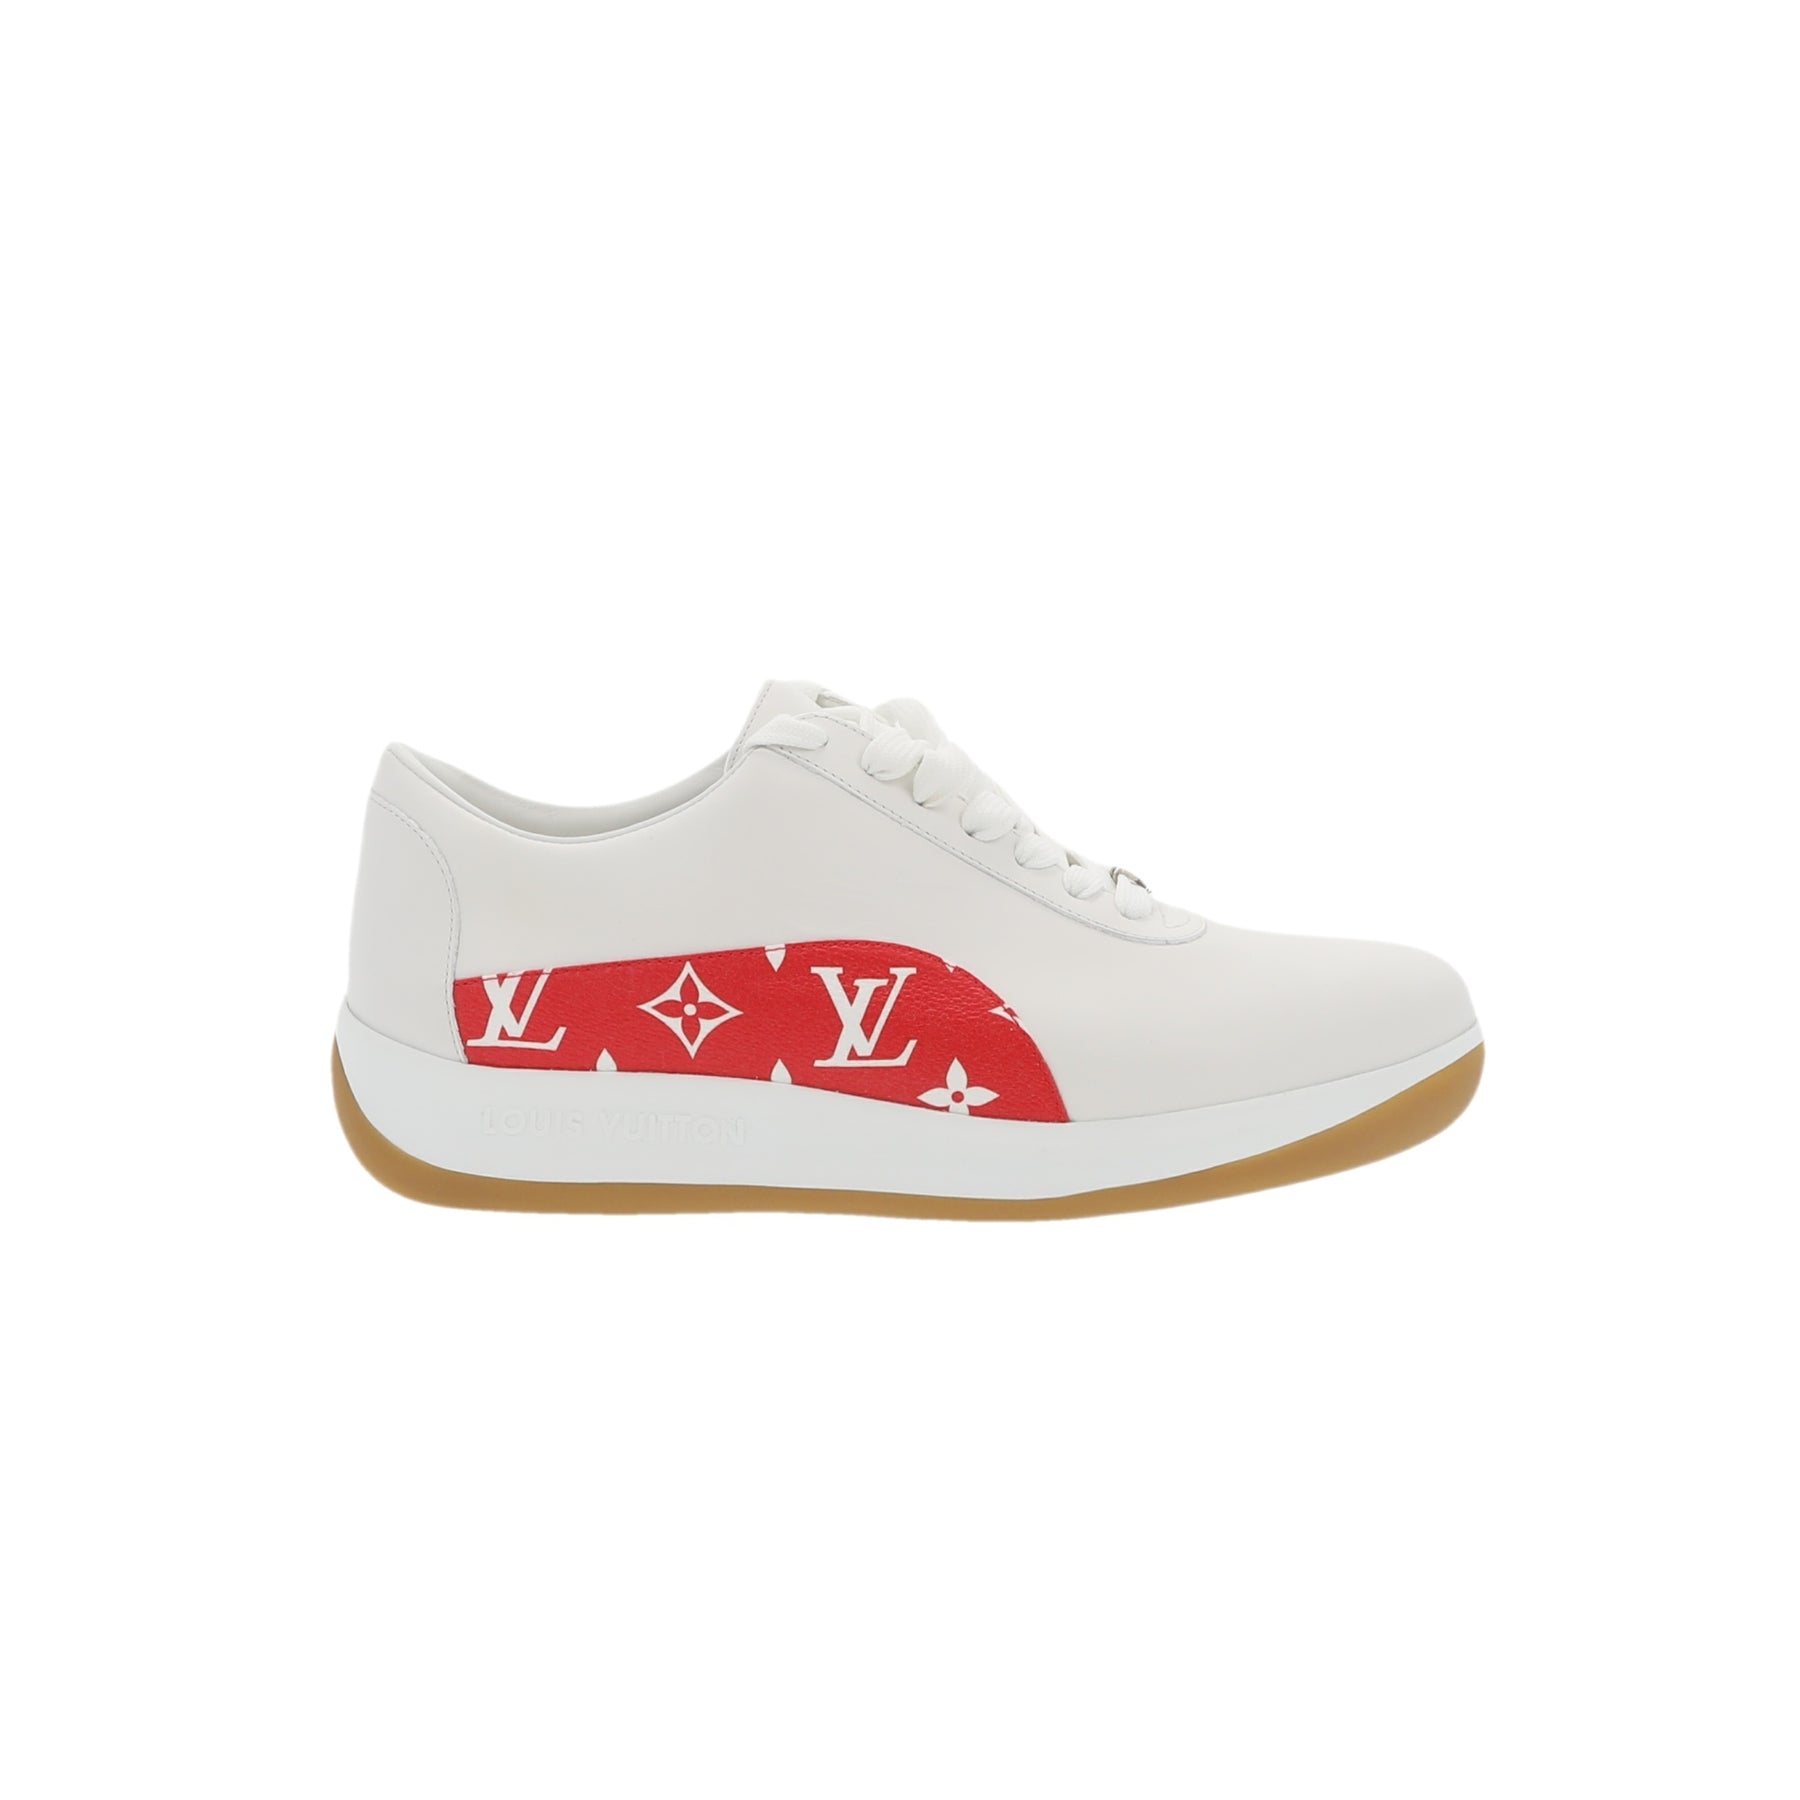 lv sneakers red and white